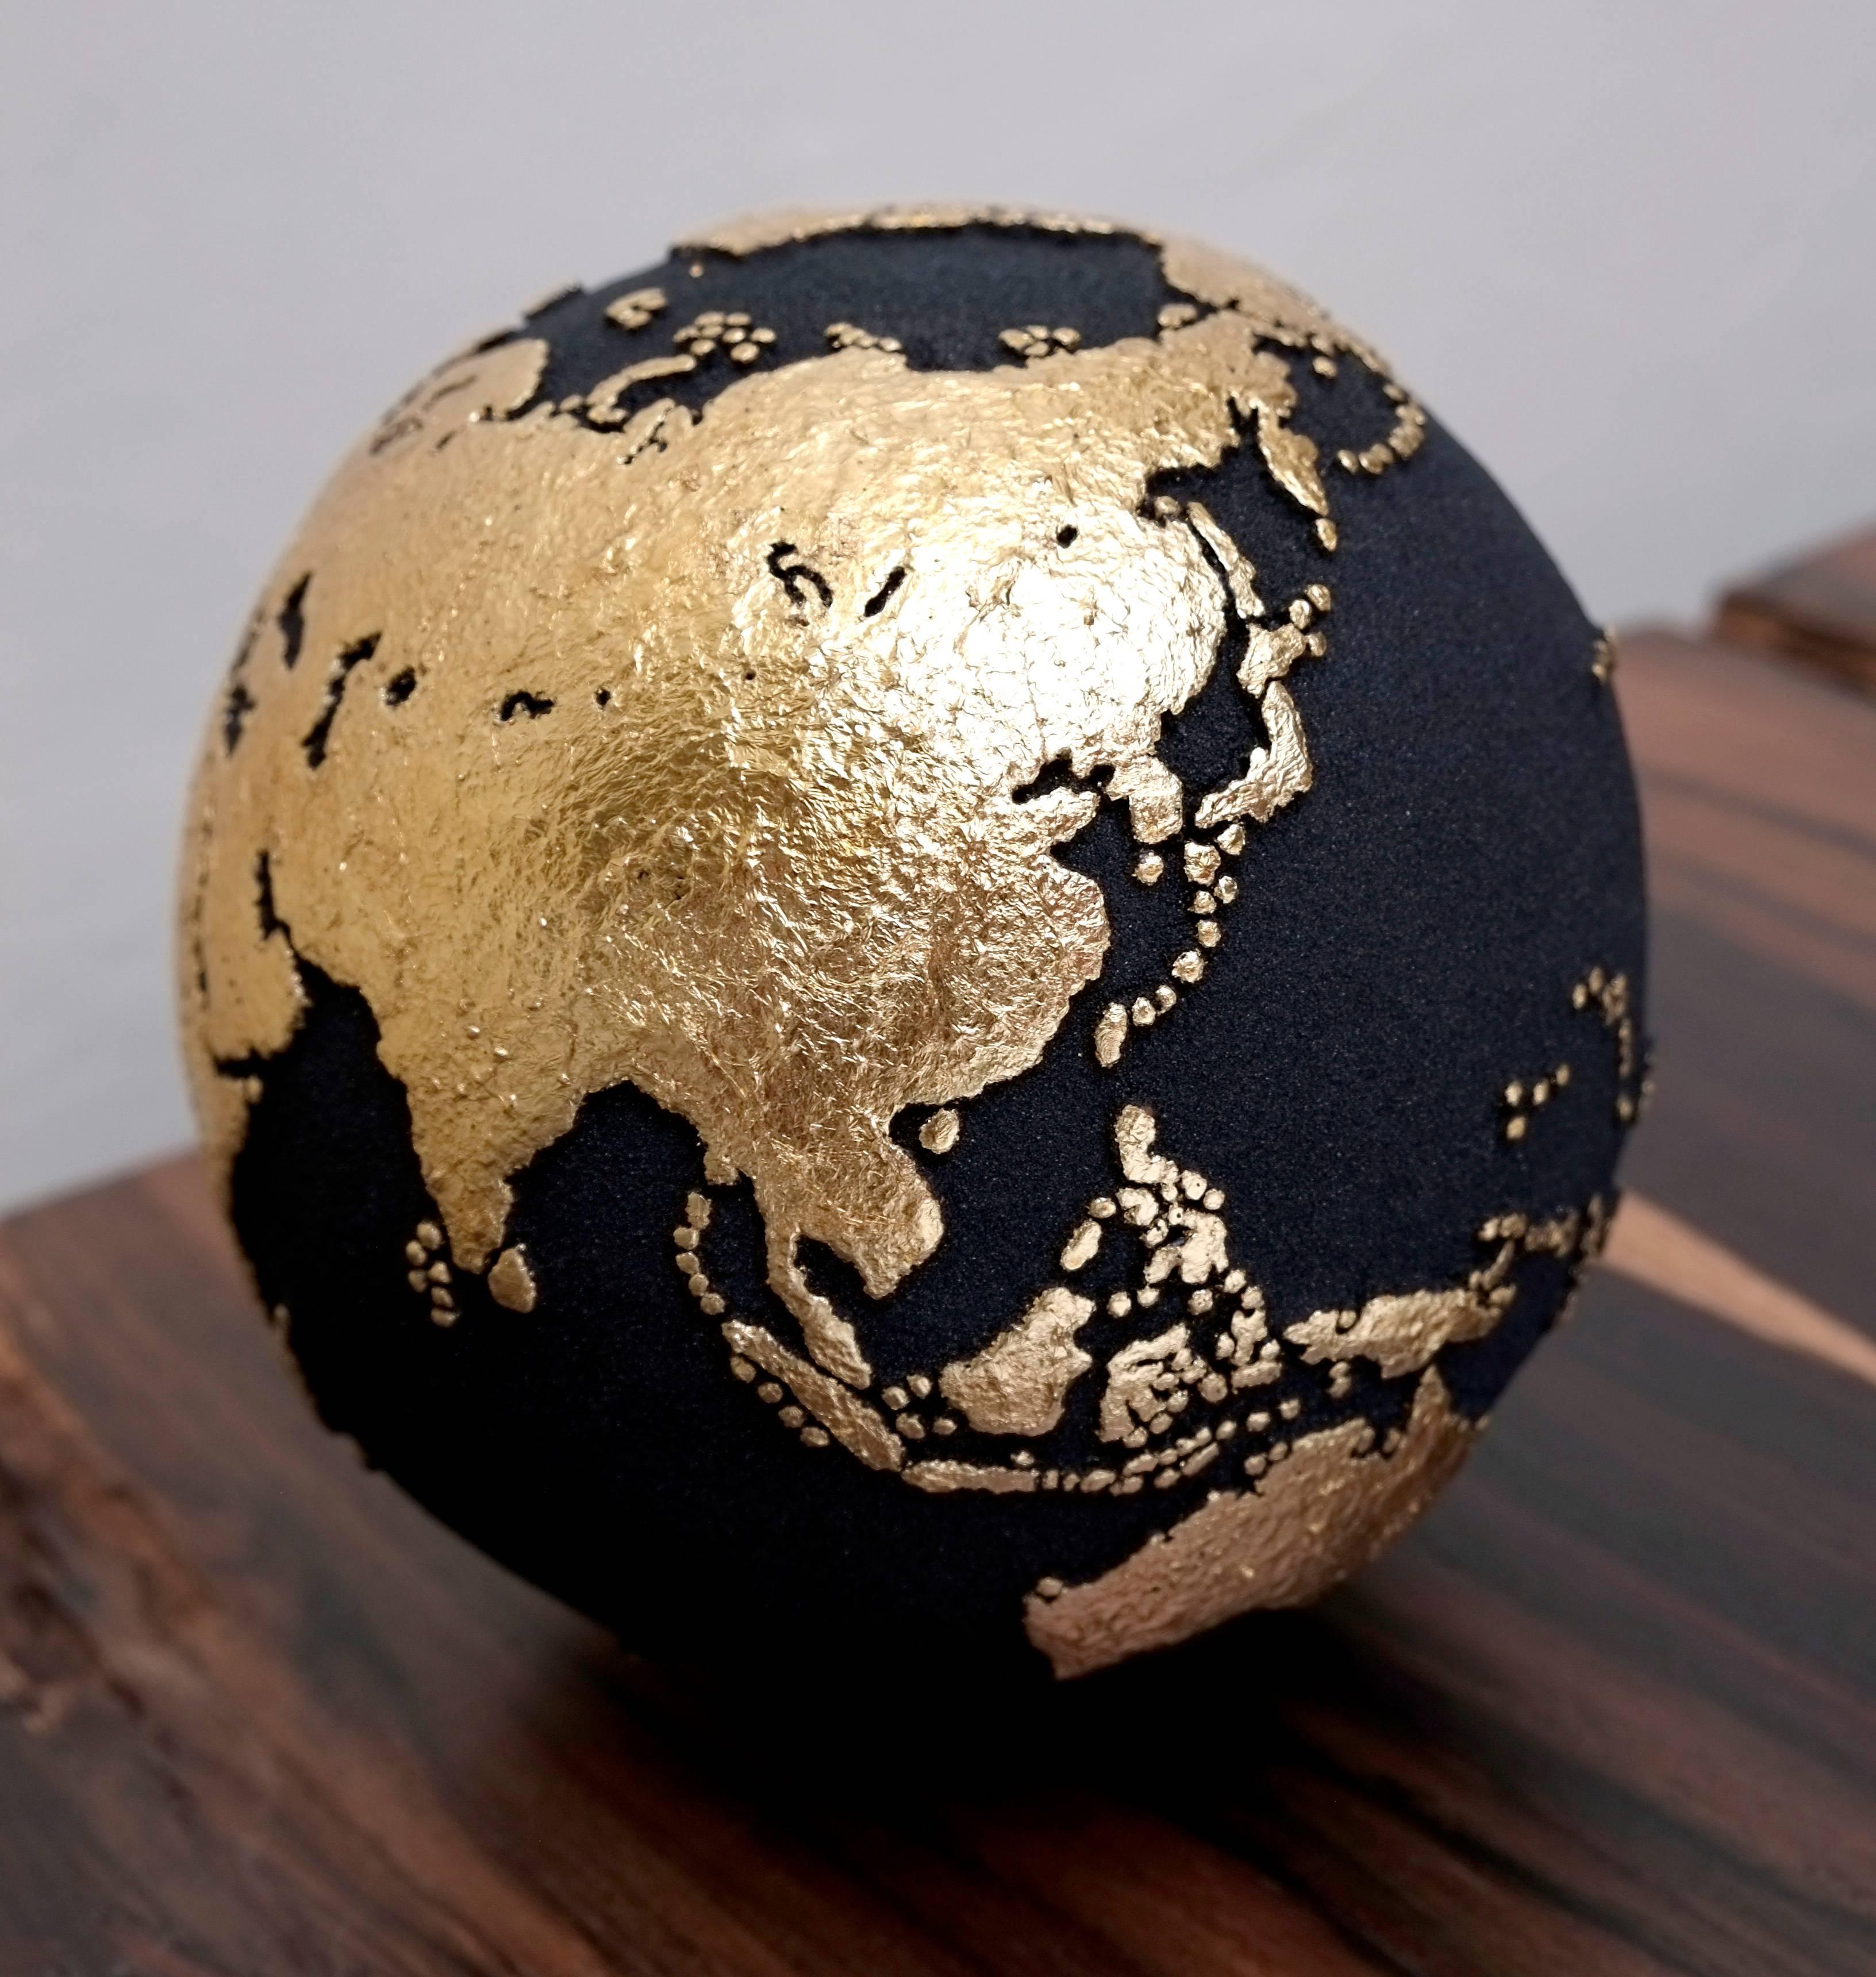 Balinese Gold Globe Made of Teak Root with Volcanic Sand and Gold Finishing, 20 cm